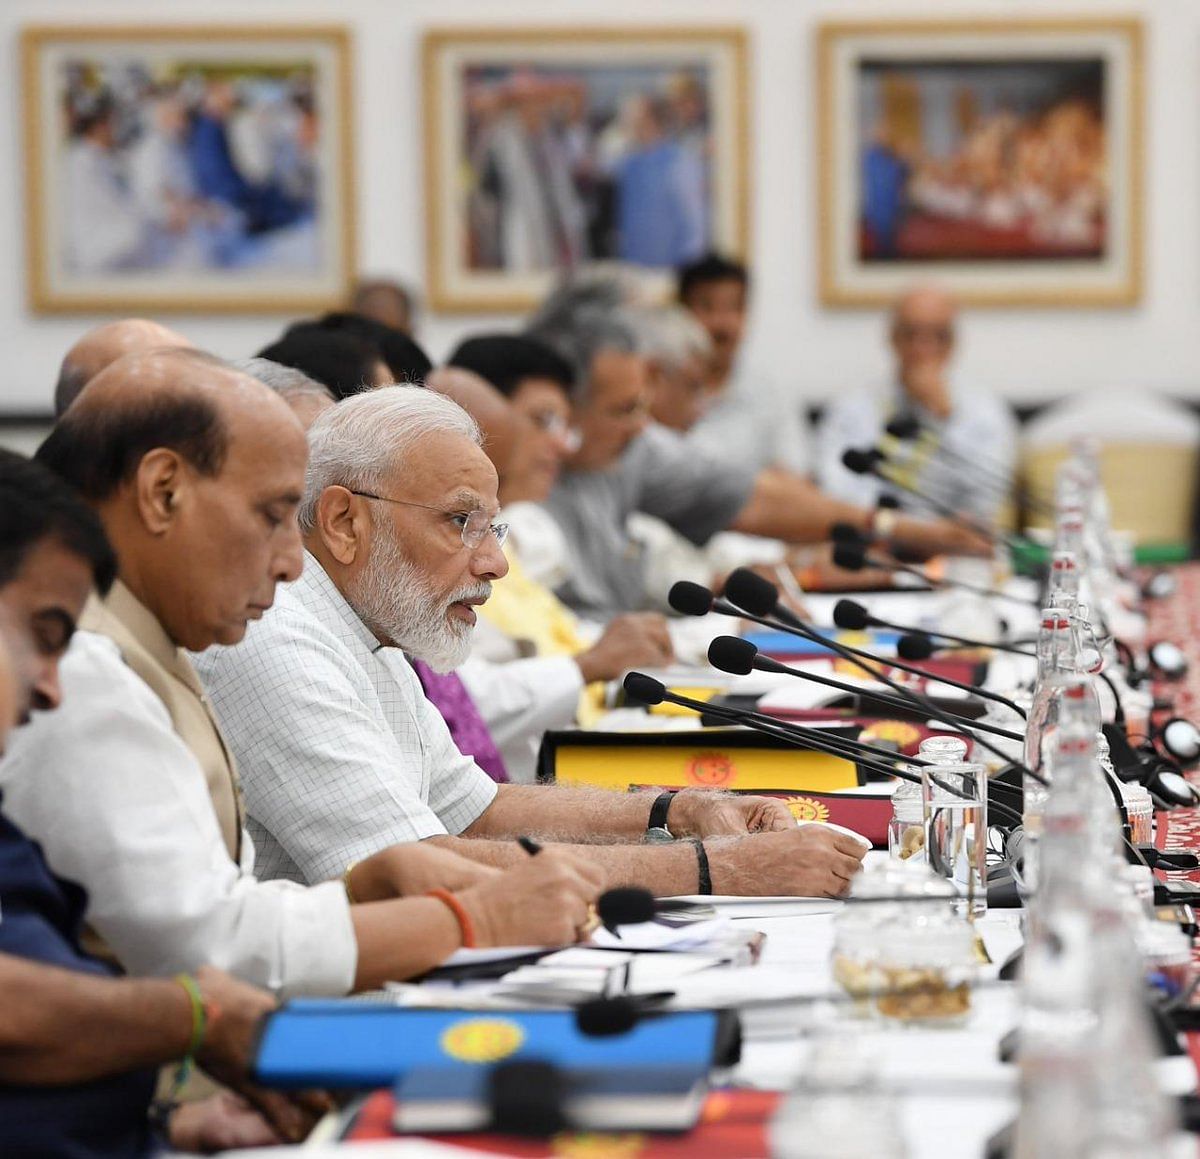 Prime Minister Narendra Modi is chairing the meeting, which is being held at Rashtrapati Bhavan. (Image courtesy Twitter/@NITIAayog) 